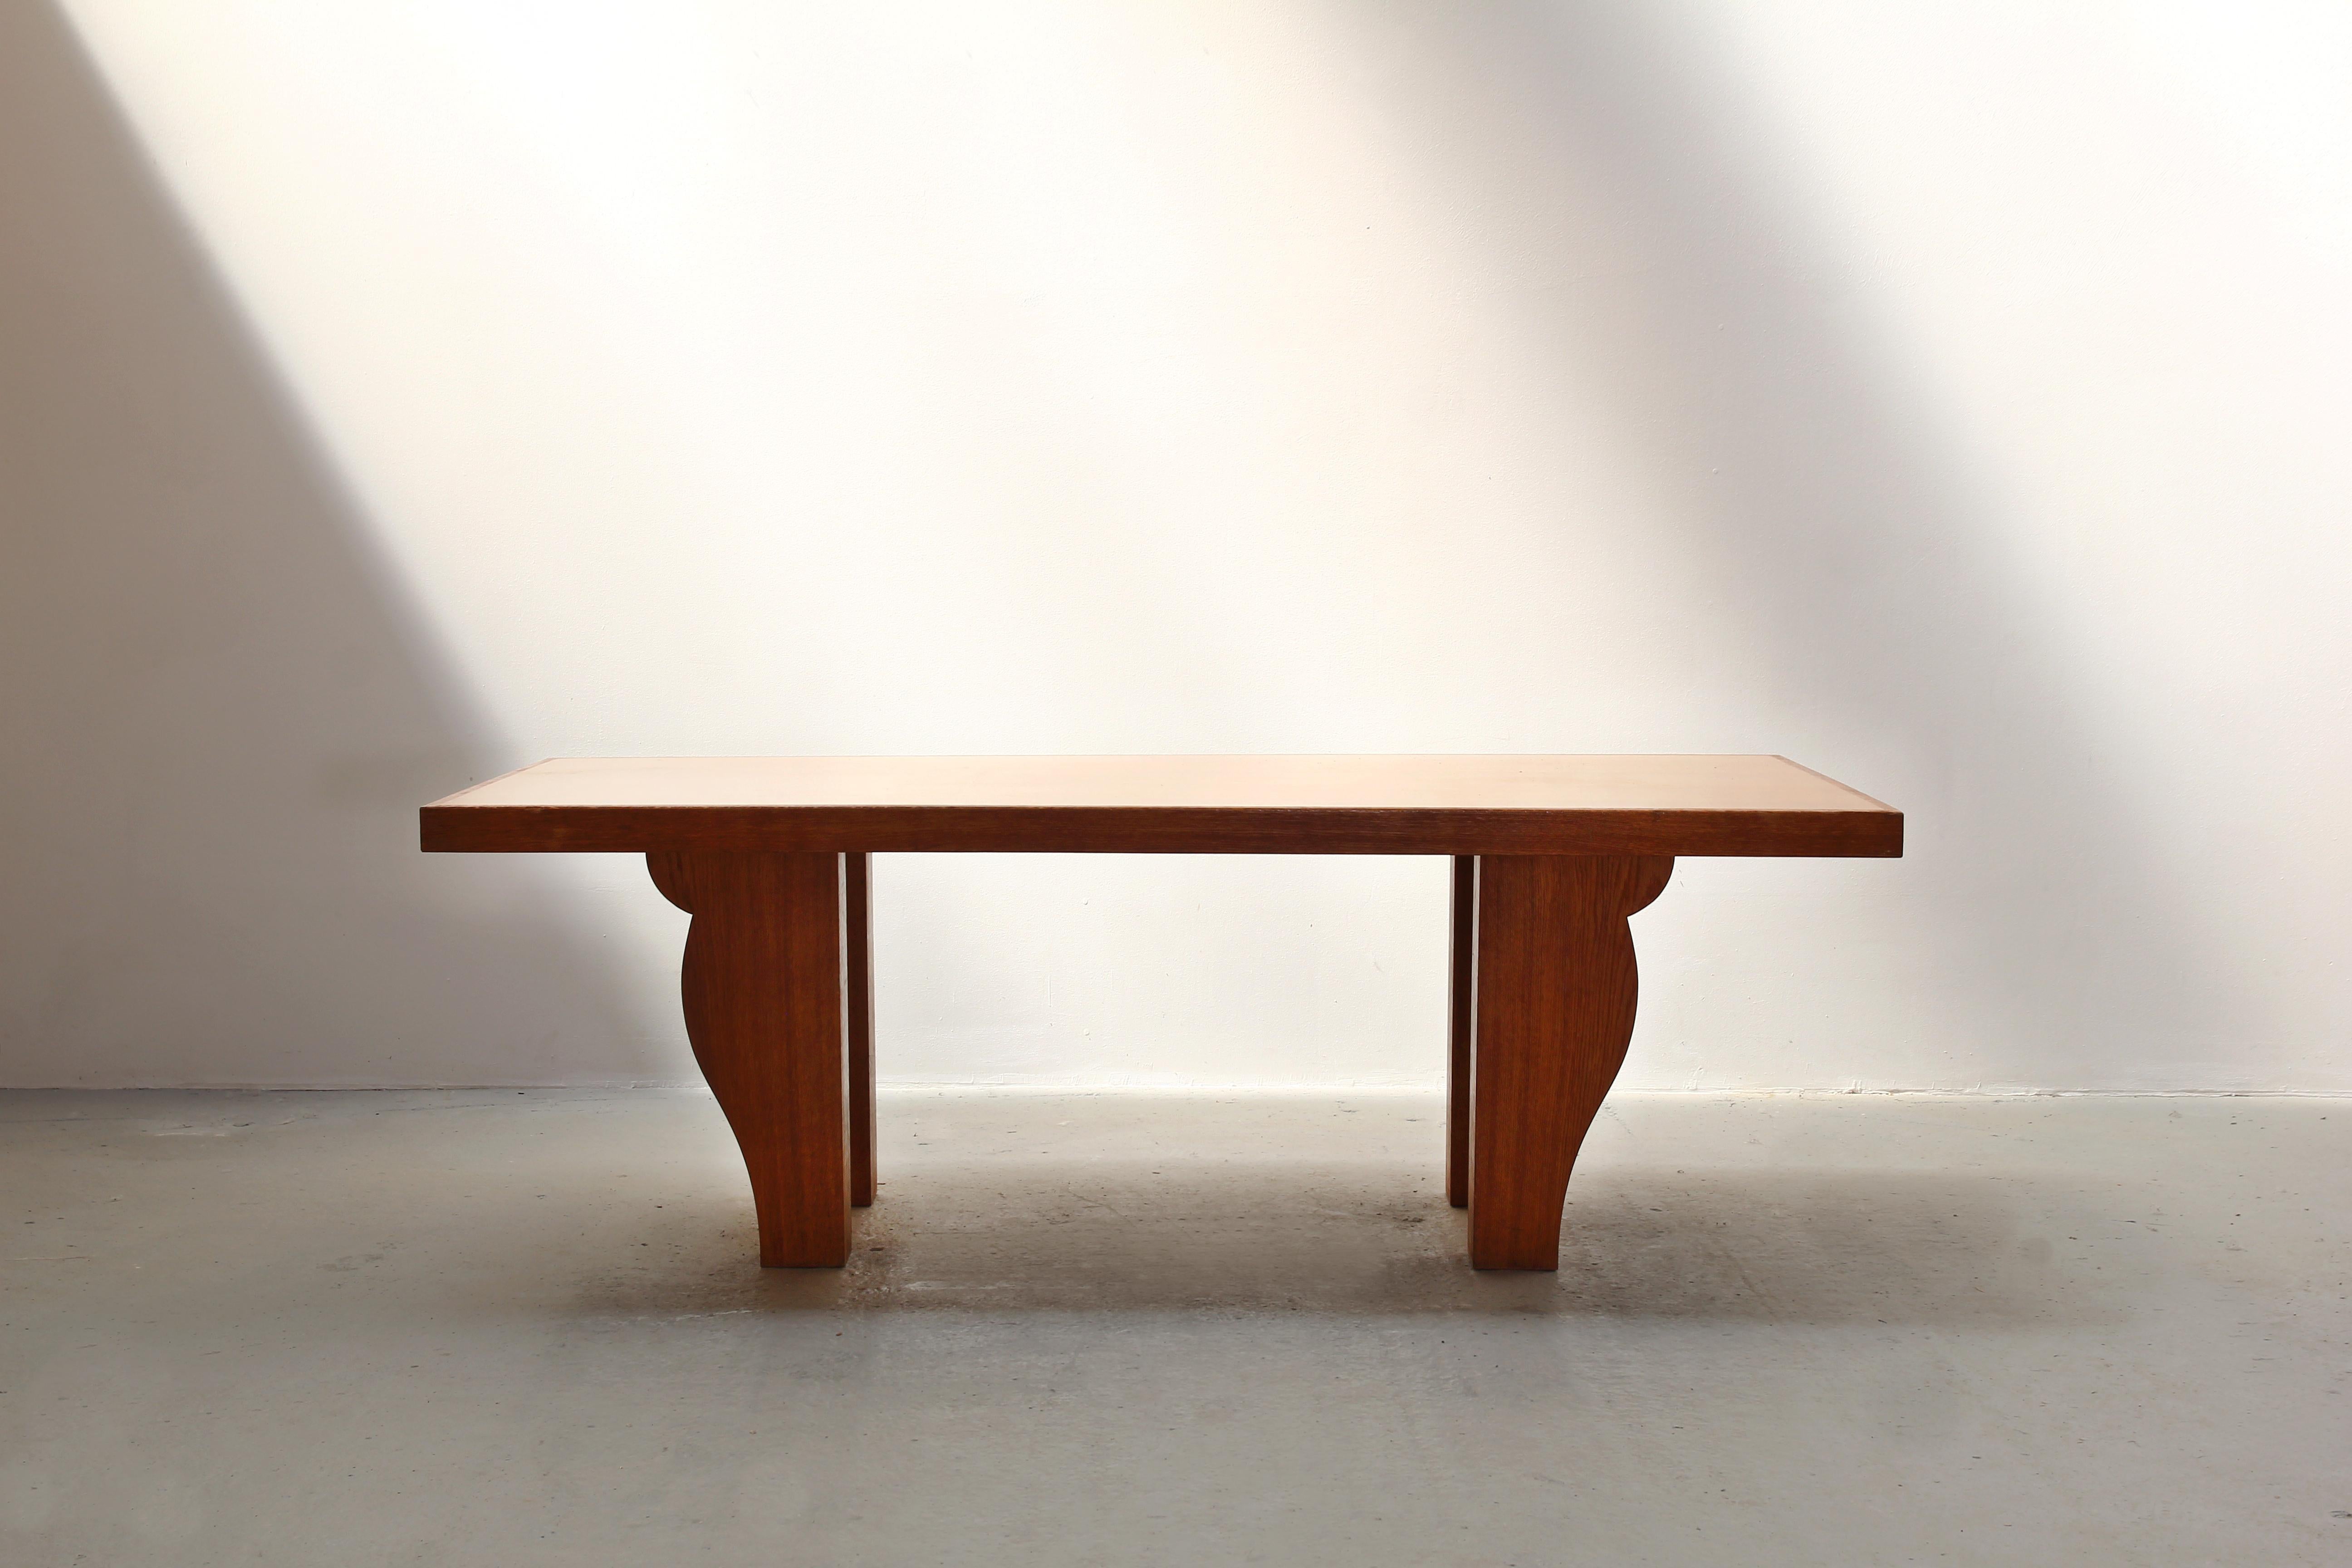 Big dining table designed by Jean-Michel Frank & Adolphe Chanaux, initially manufactured by Jean-Pierre Guerlain, Reedition from 1980 by Ecart International.
This dining table is made out of oak and comes in a great condition with just little